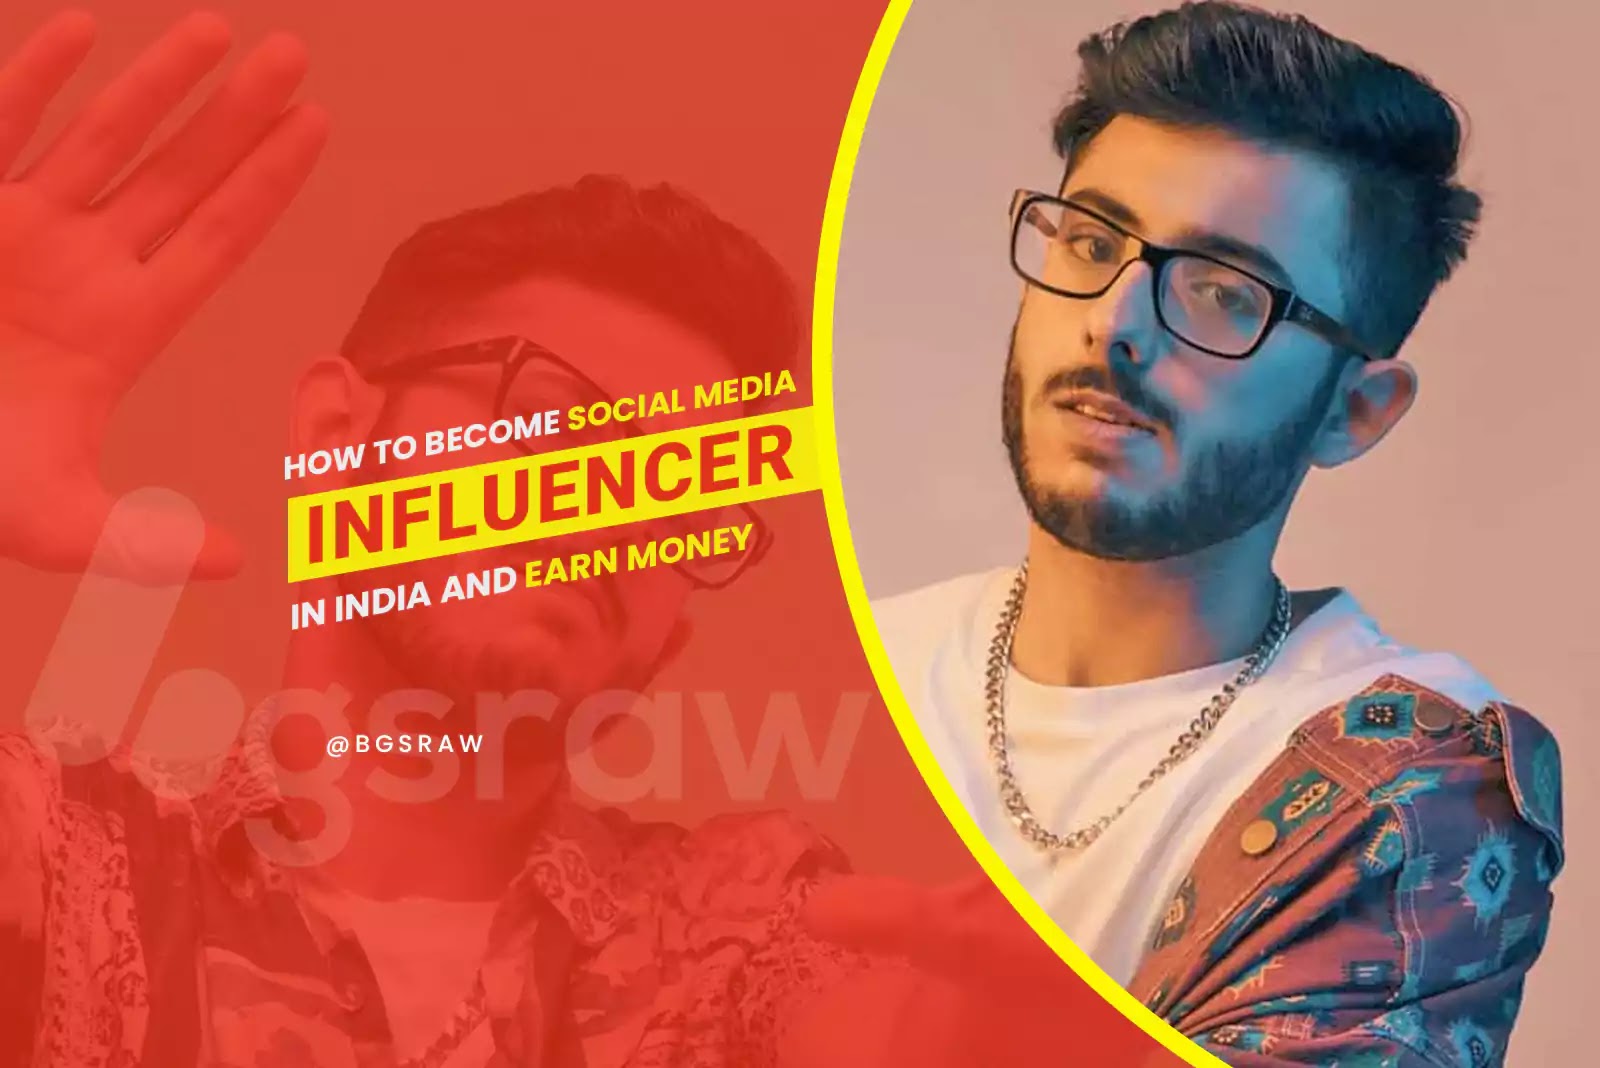 How to Become Influencer on Instagram in India and Earn Money